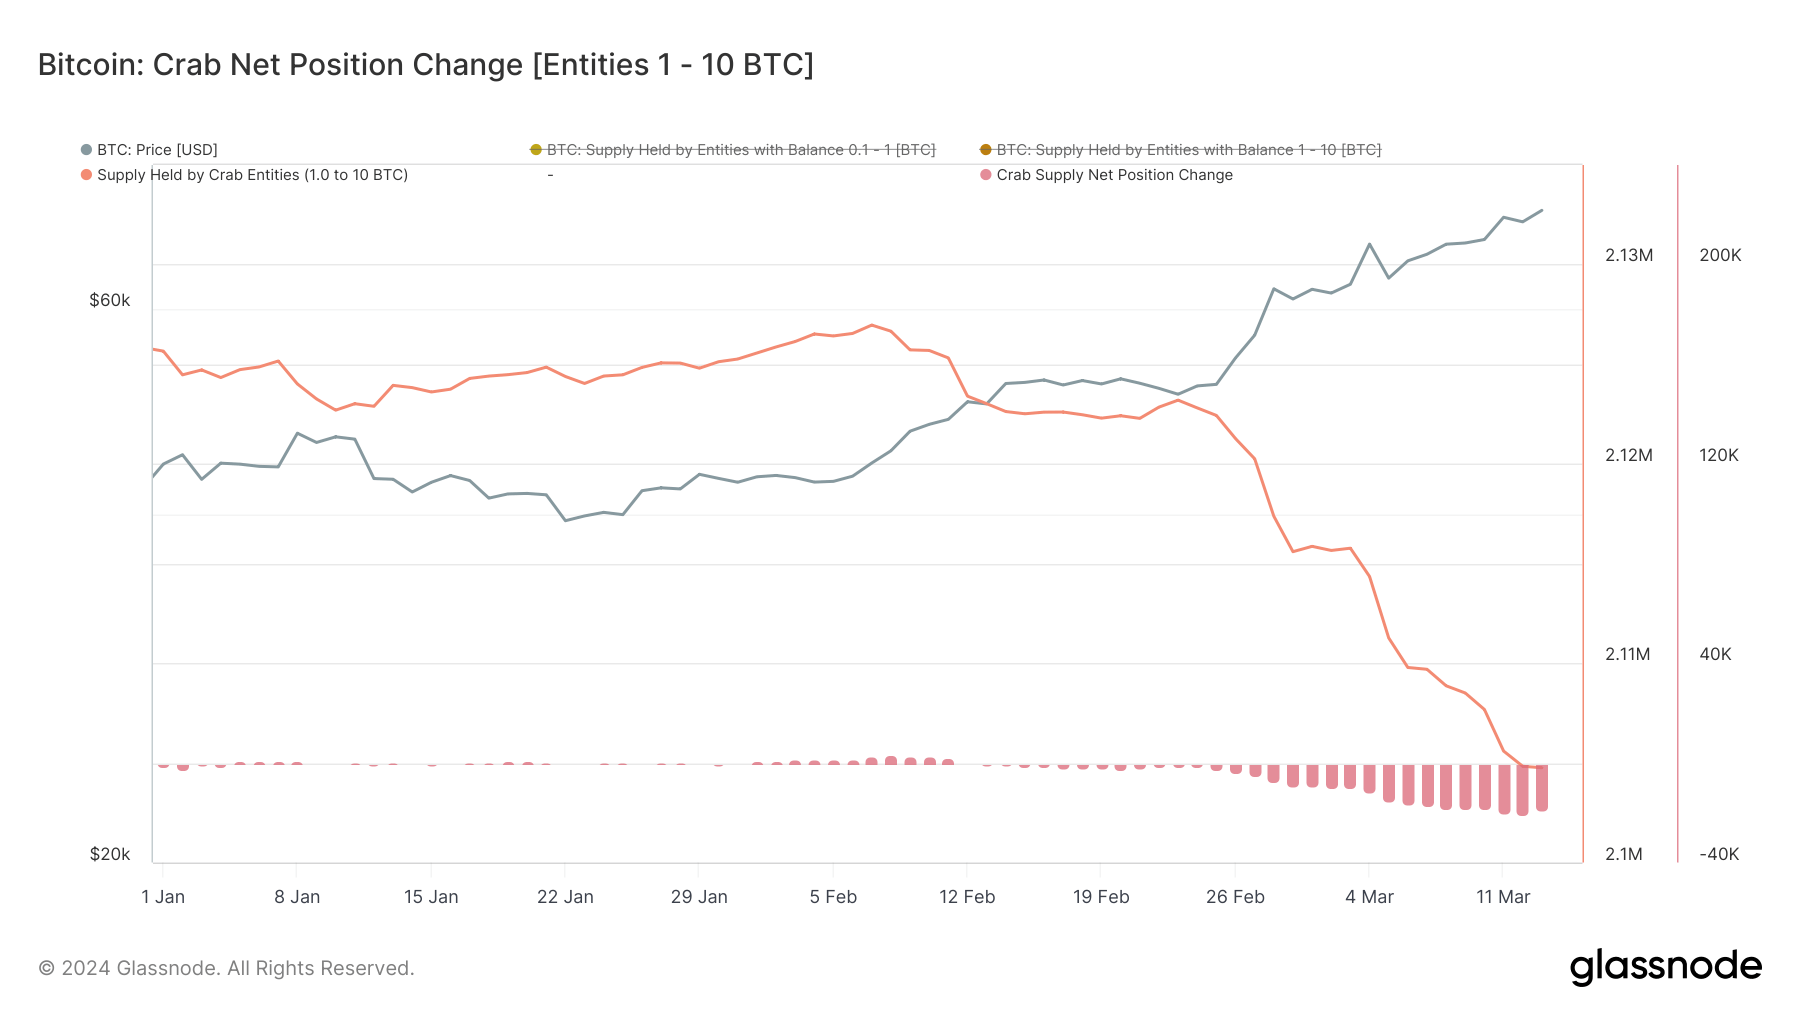 Changes in Bitcoin Crab Supply Net Position since the beginning of the year